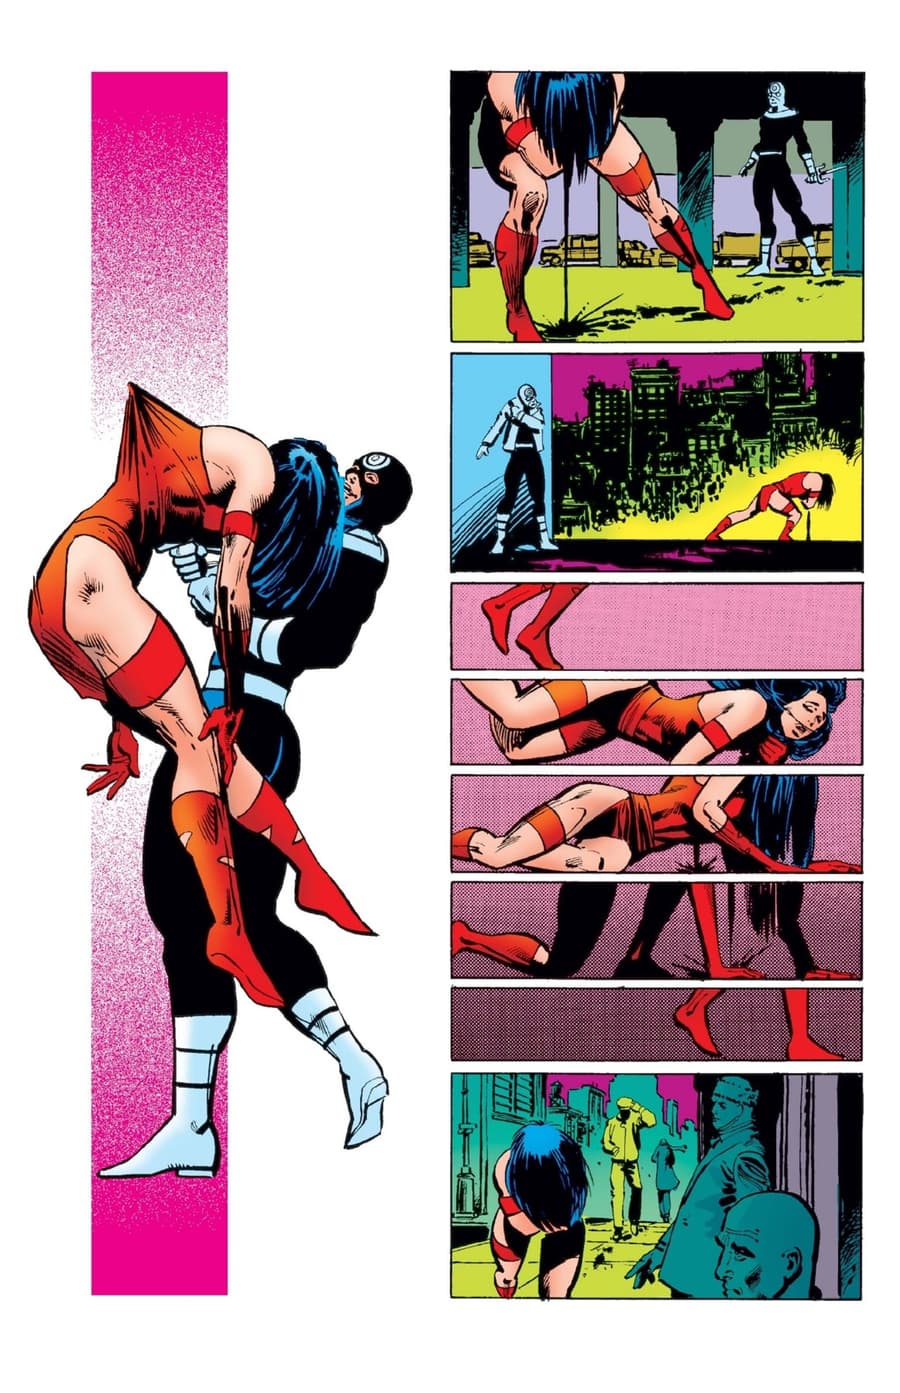 DAREDEVIL (1964) #181 page by Frank Miller and Klaus Janson